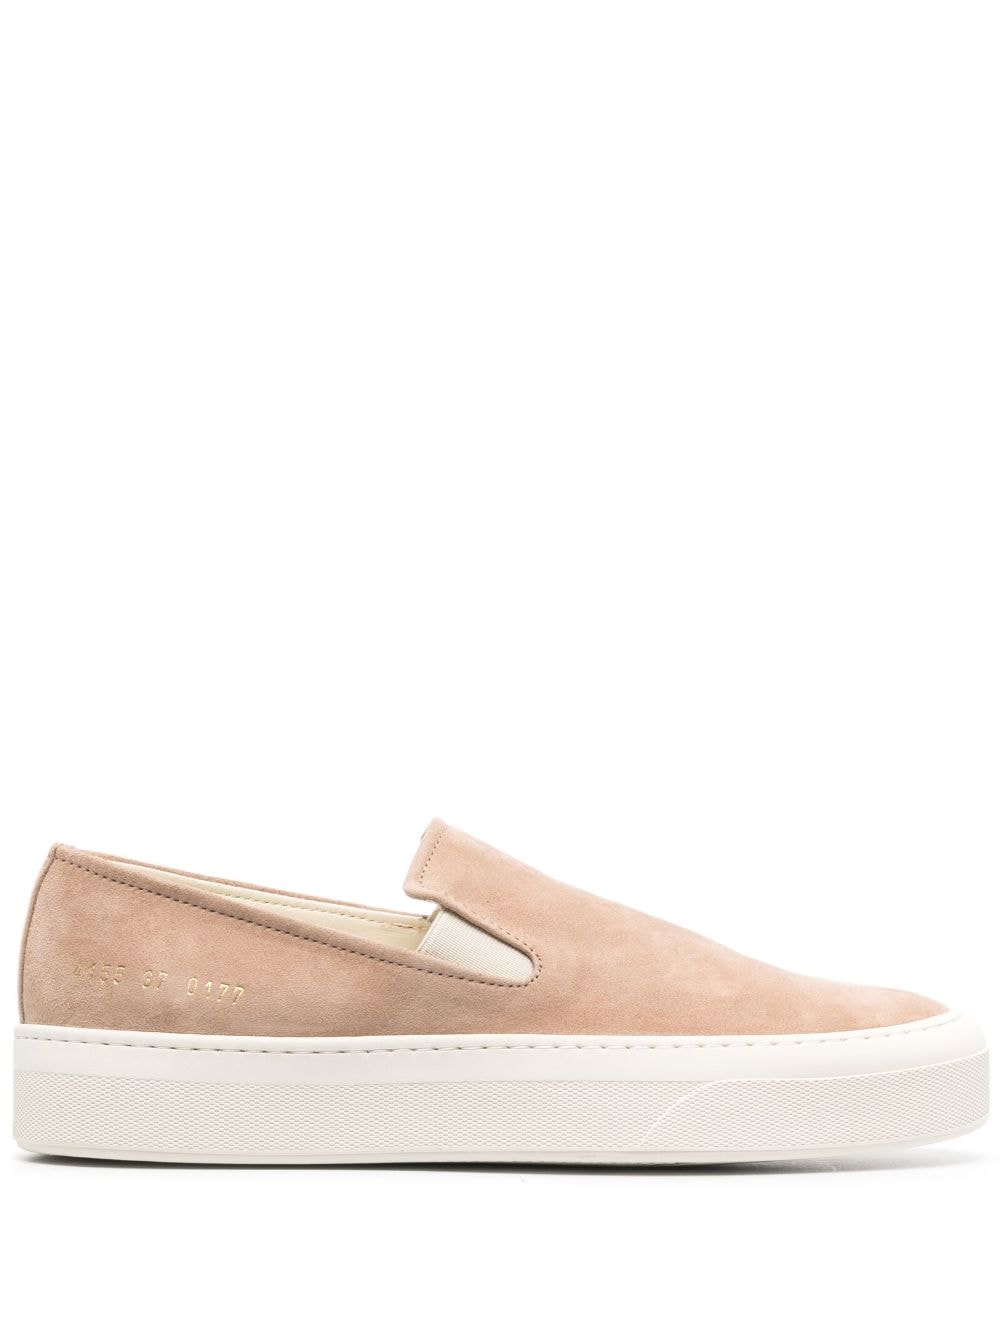 COMMON PROJECTS SLIP-ON SUEDE SNEAKERS